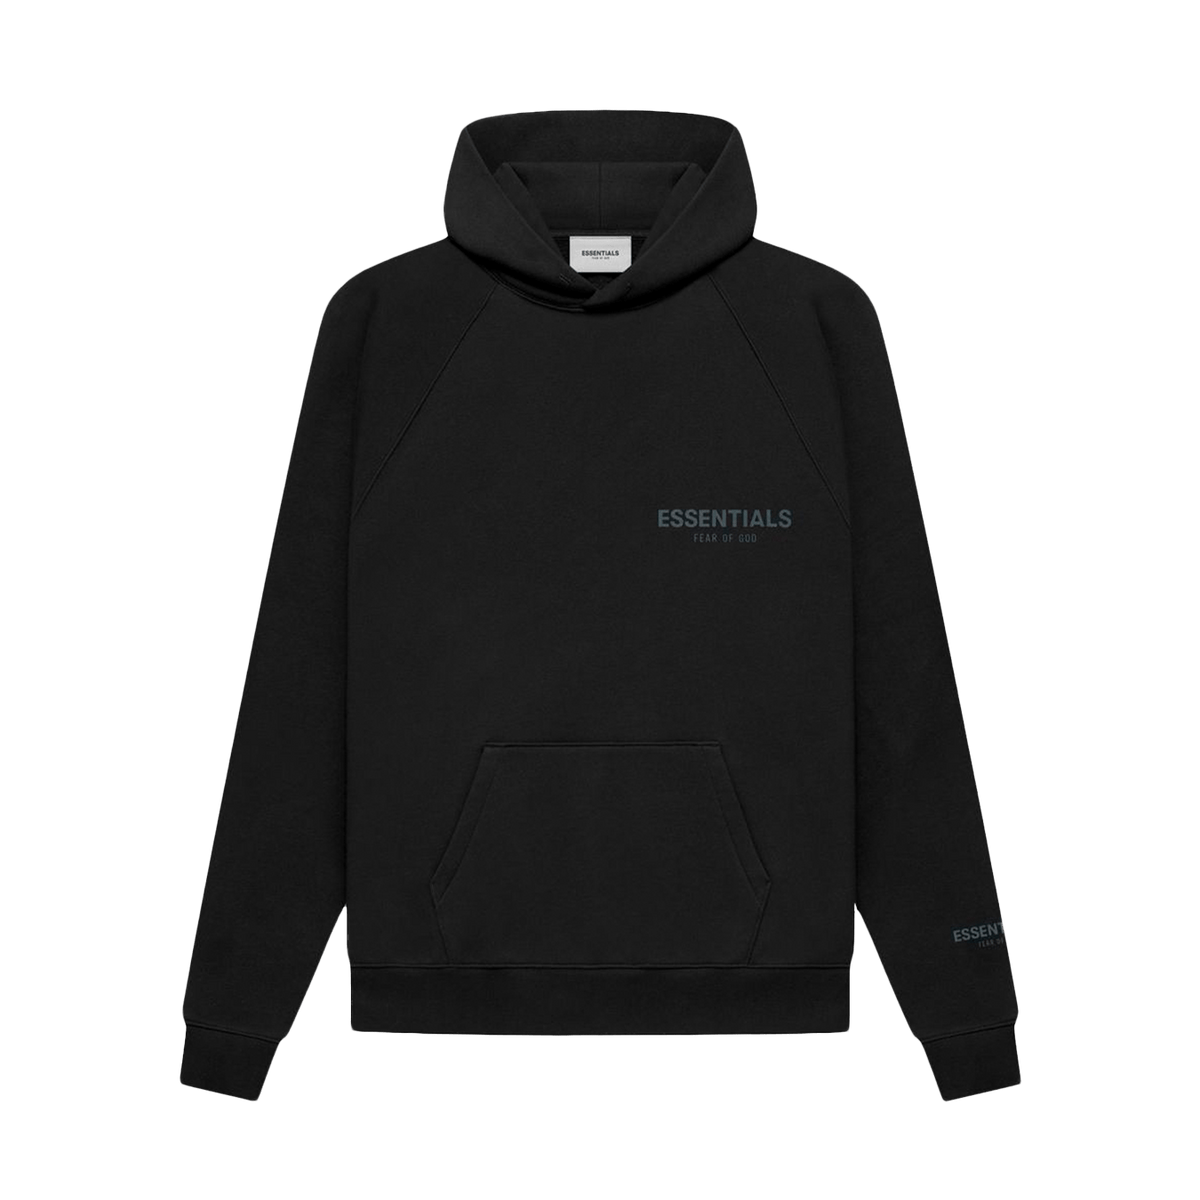 NEW Fear of God Essentials Core Stretch Limo Black Hoodie SS22 Size Large  (L)